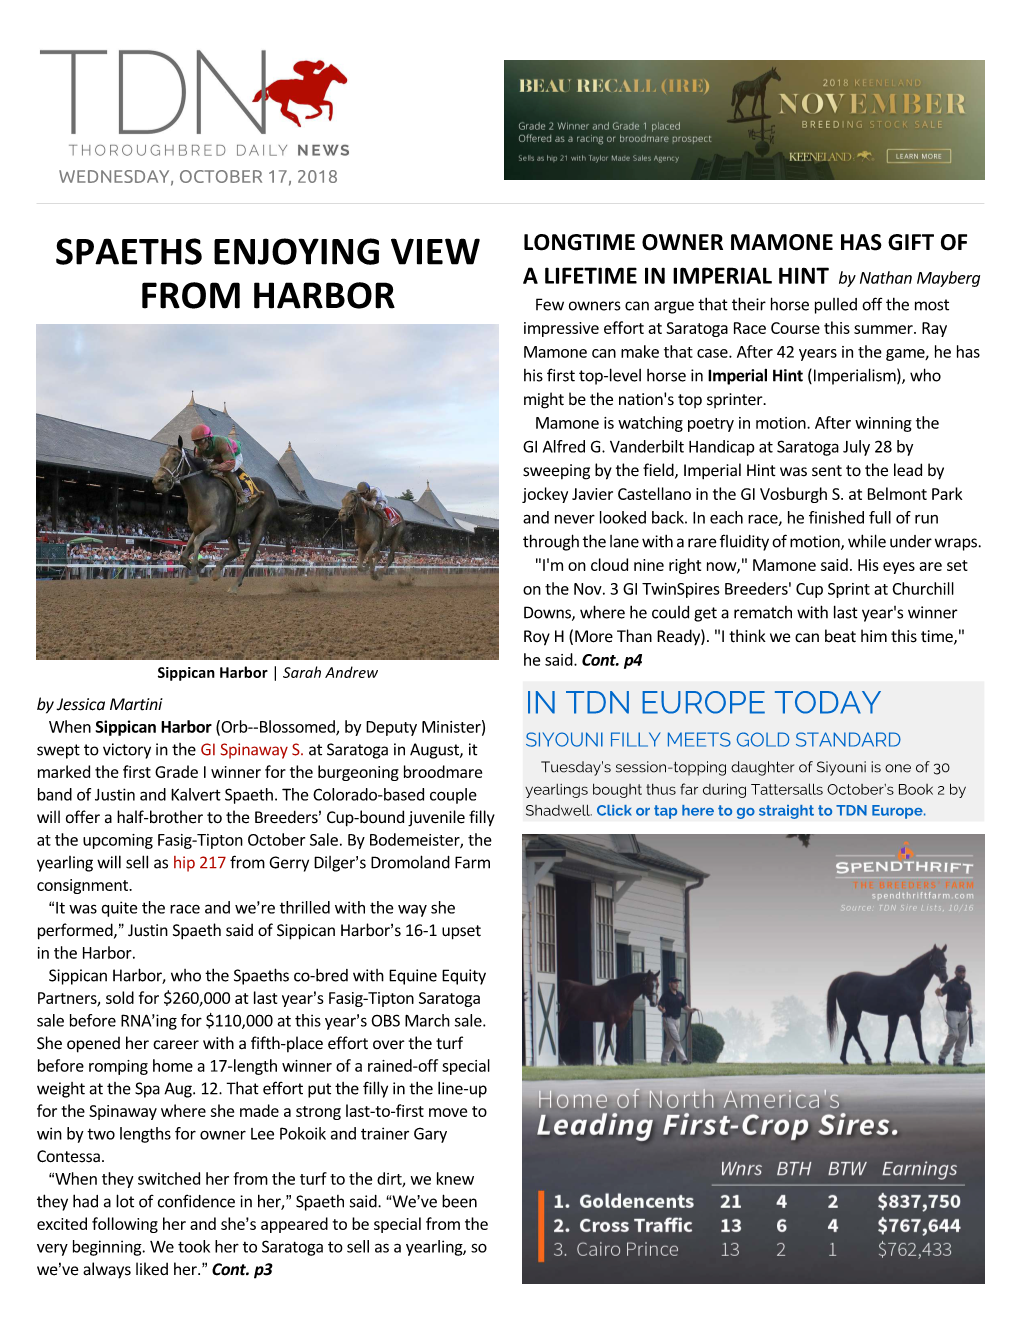 IN TDN EUROPE TODAY When Sippican Harbor (Orb--Blossomed, by Deputy Minister) Swept to Victory in the GI Spinaway S